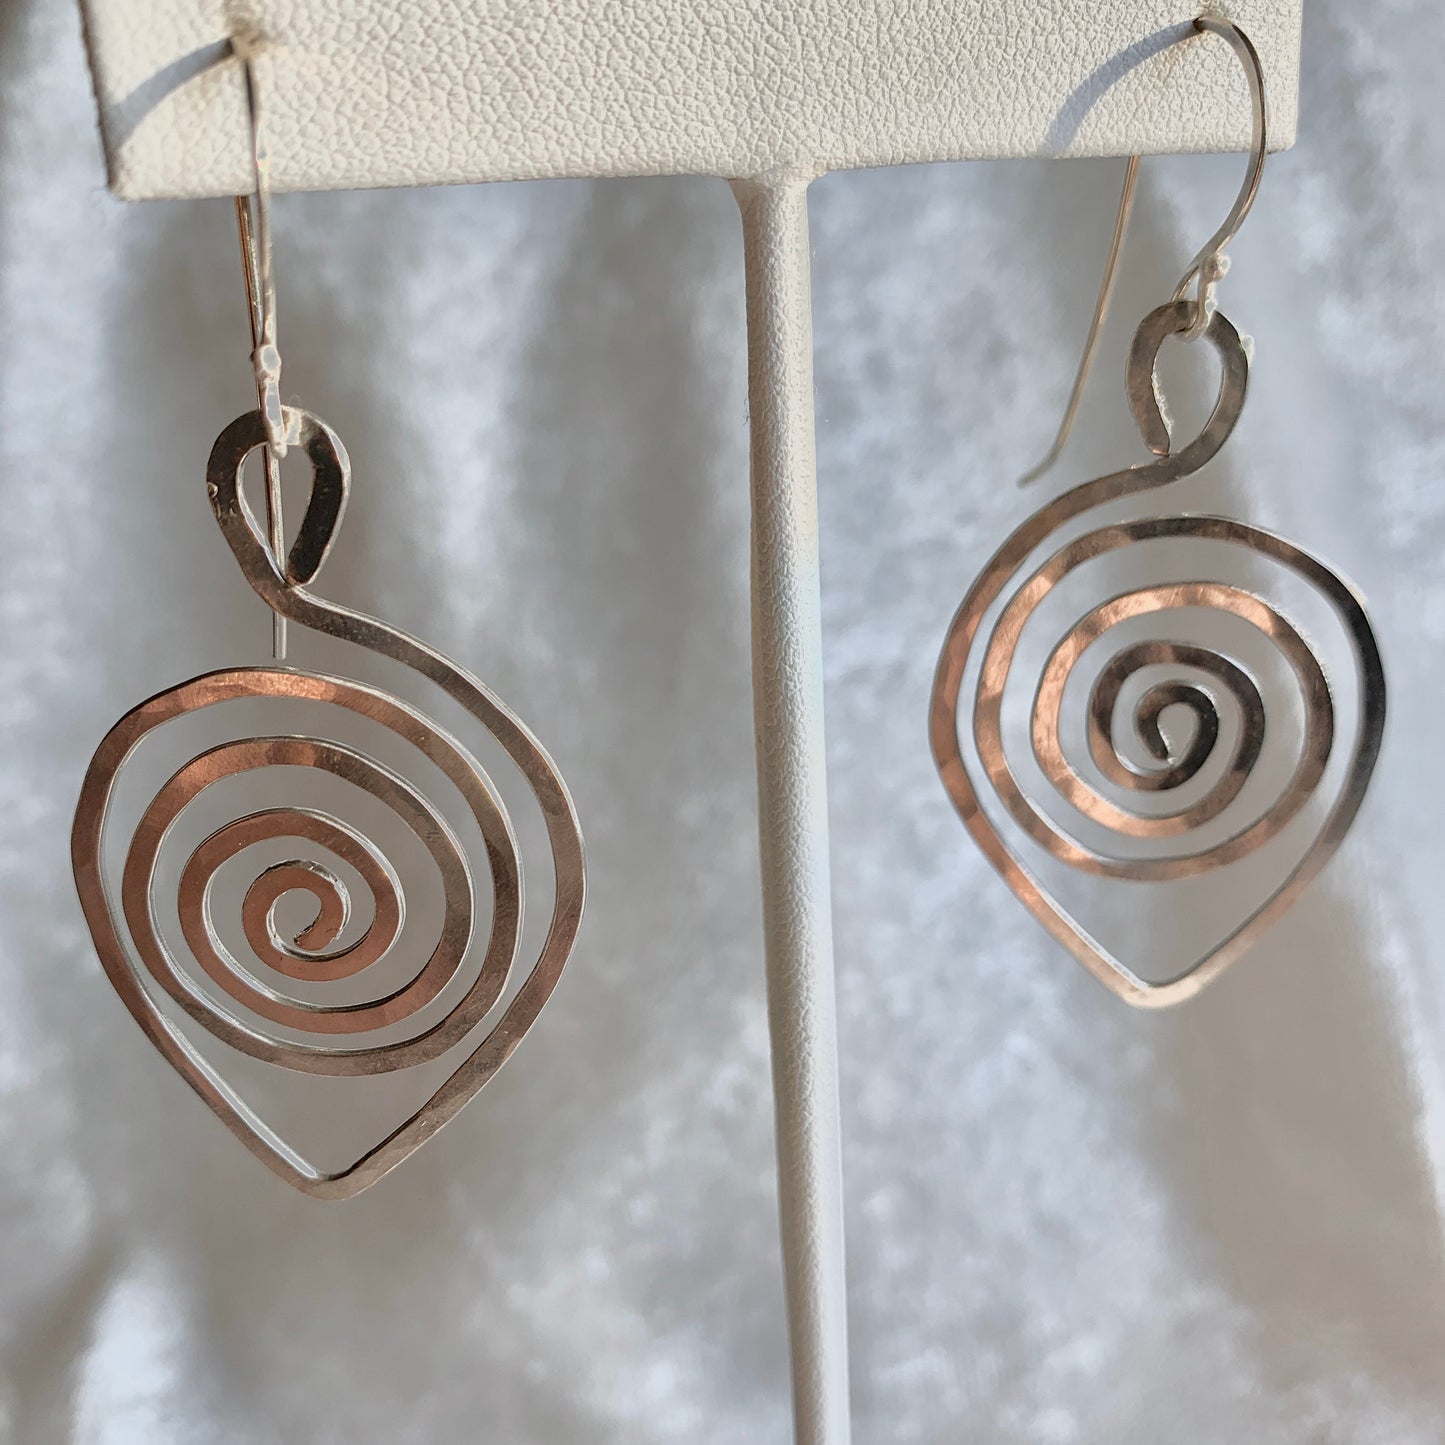 Spiral leaf-shaped earrings - spiral design leaf in silver wire with sterling silver ear wires.